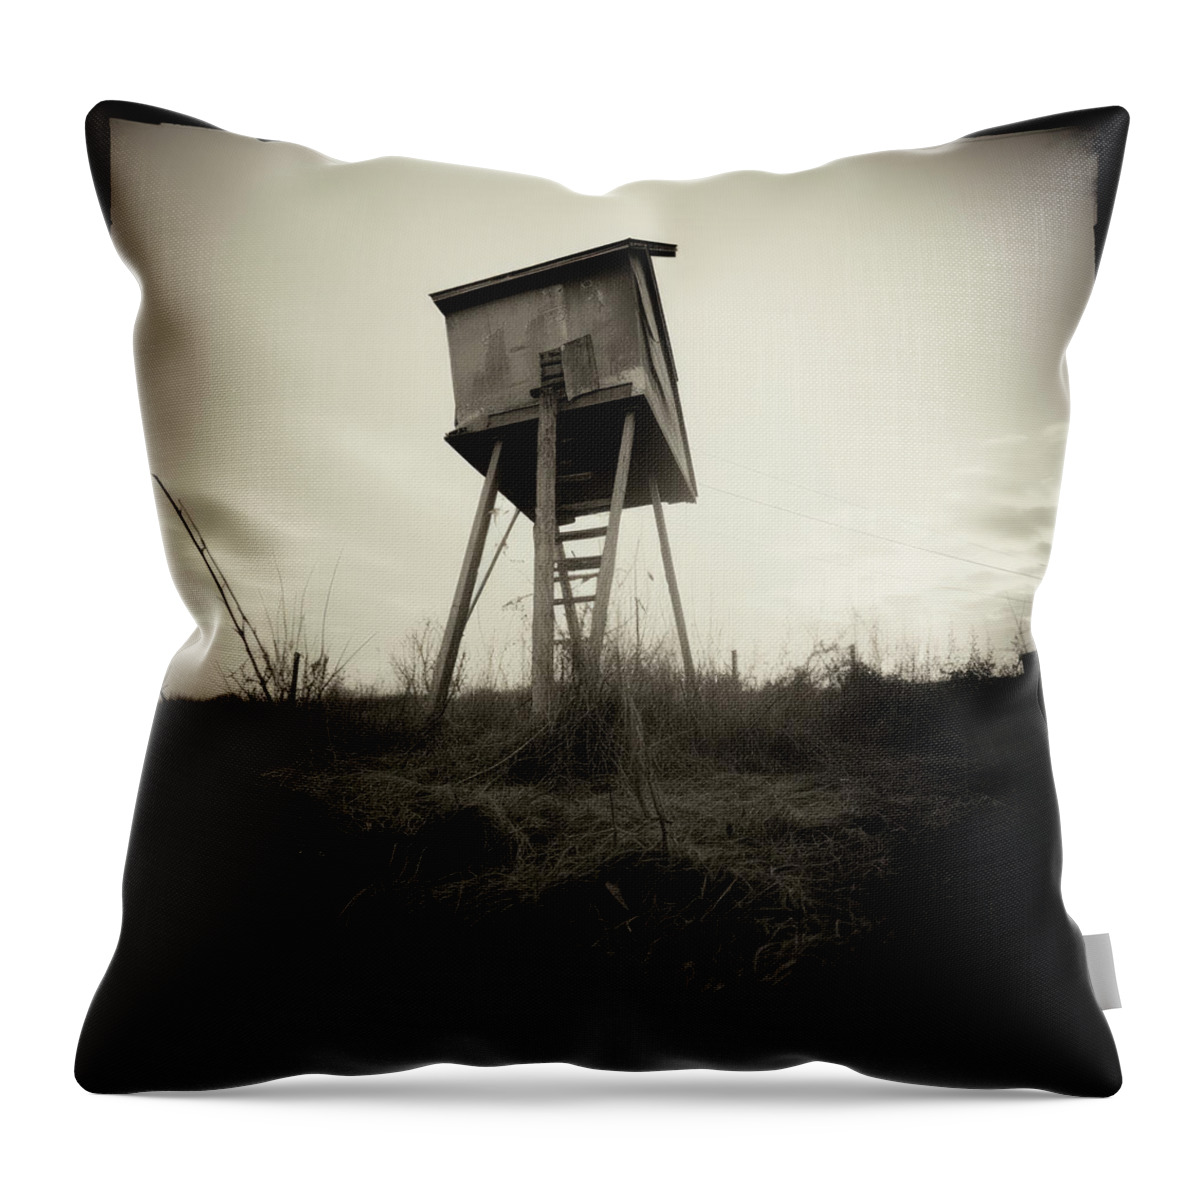 Black And White Throw Pillow featuring the digital art Holga Image of Playhouse on Stilts by YoPedro